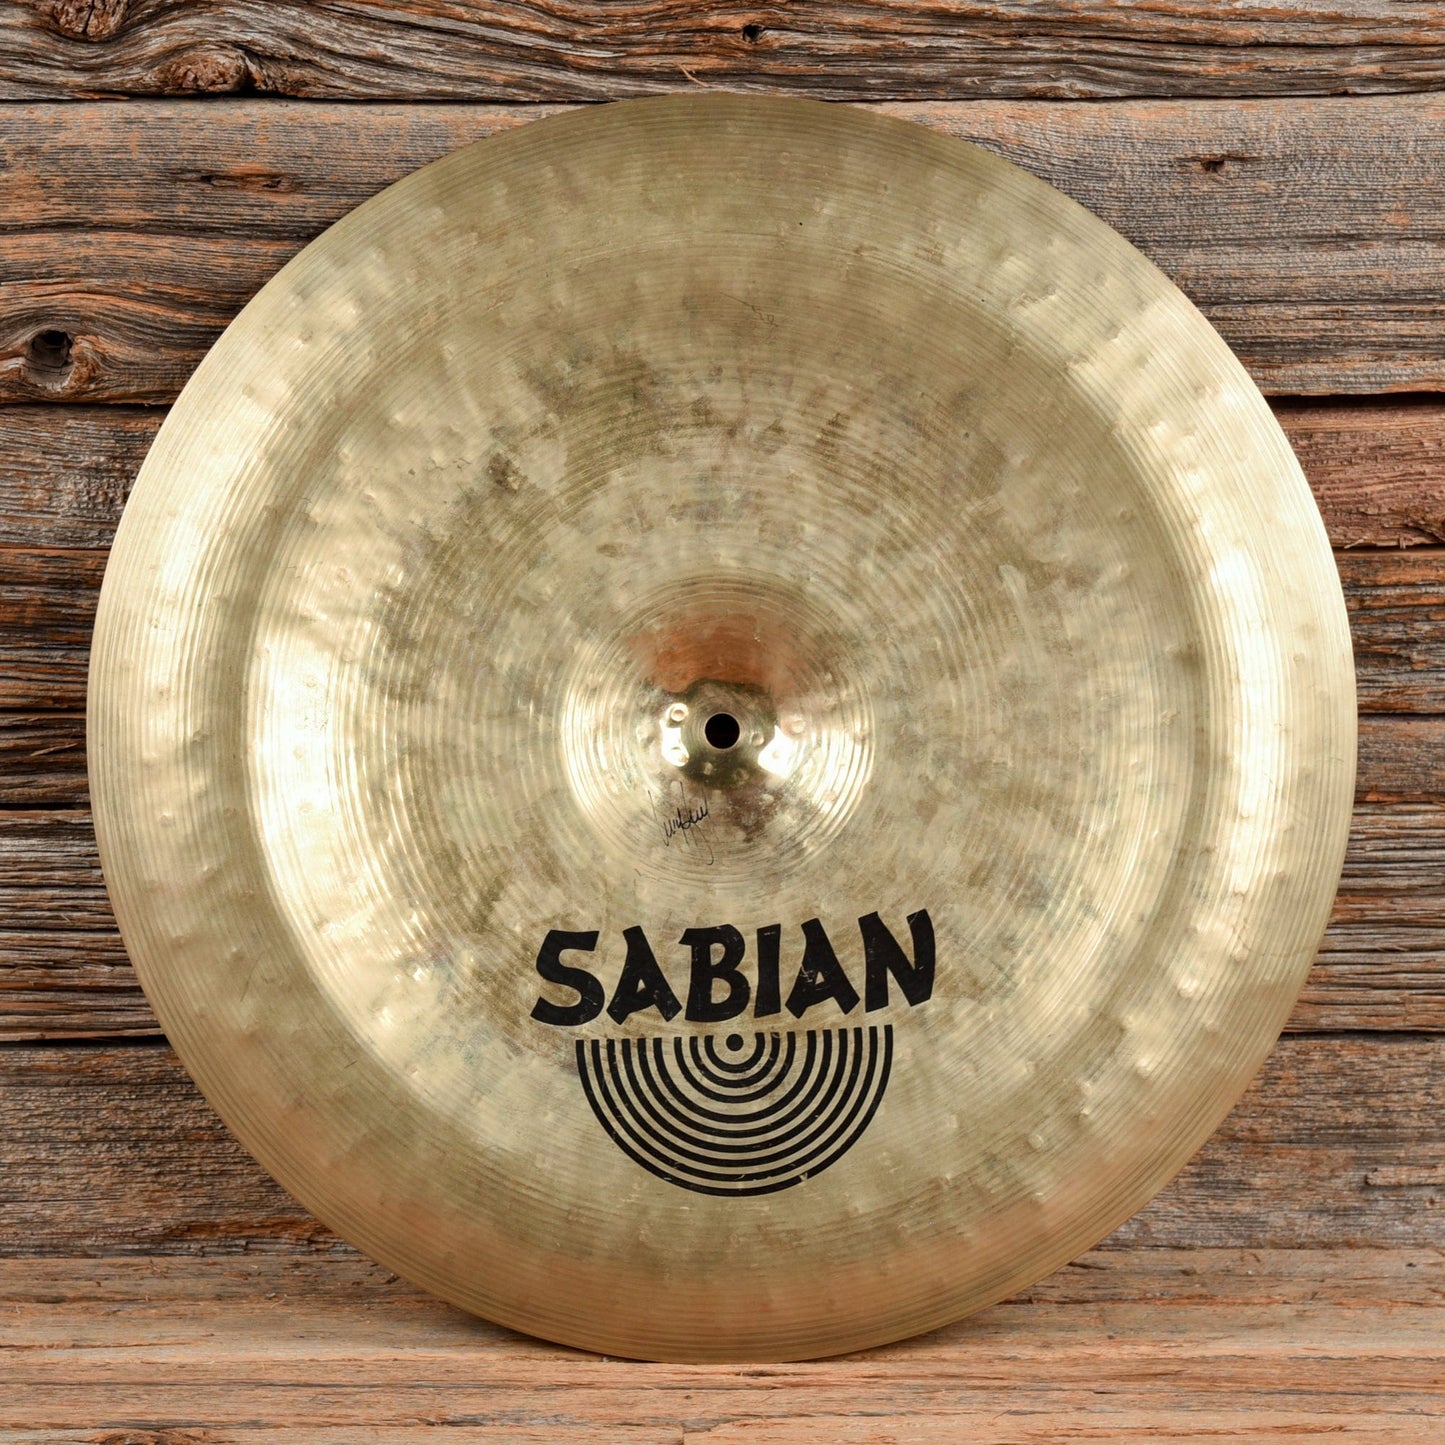 Sabian 18" Hand Hammered HH Thin Chinese Cymbal USED Drums and Percussion